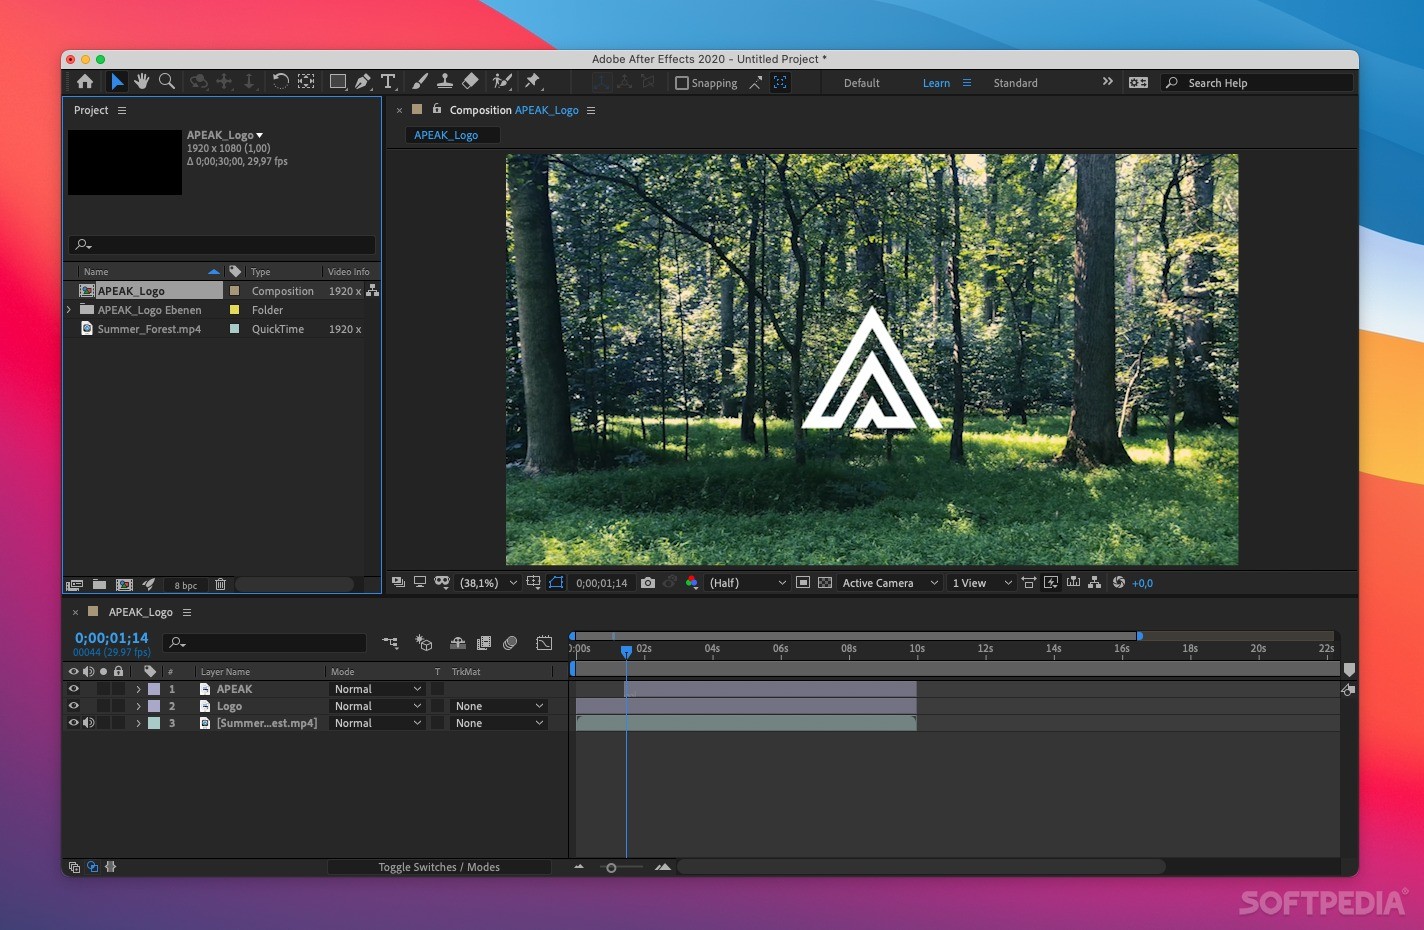 free trial download adobe after effects cc 2014